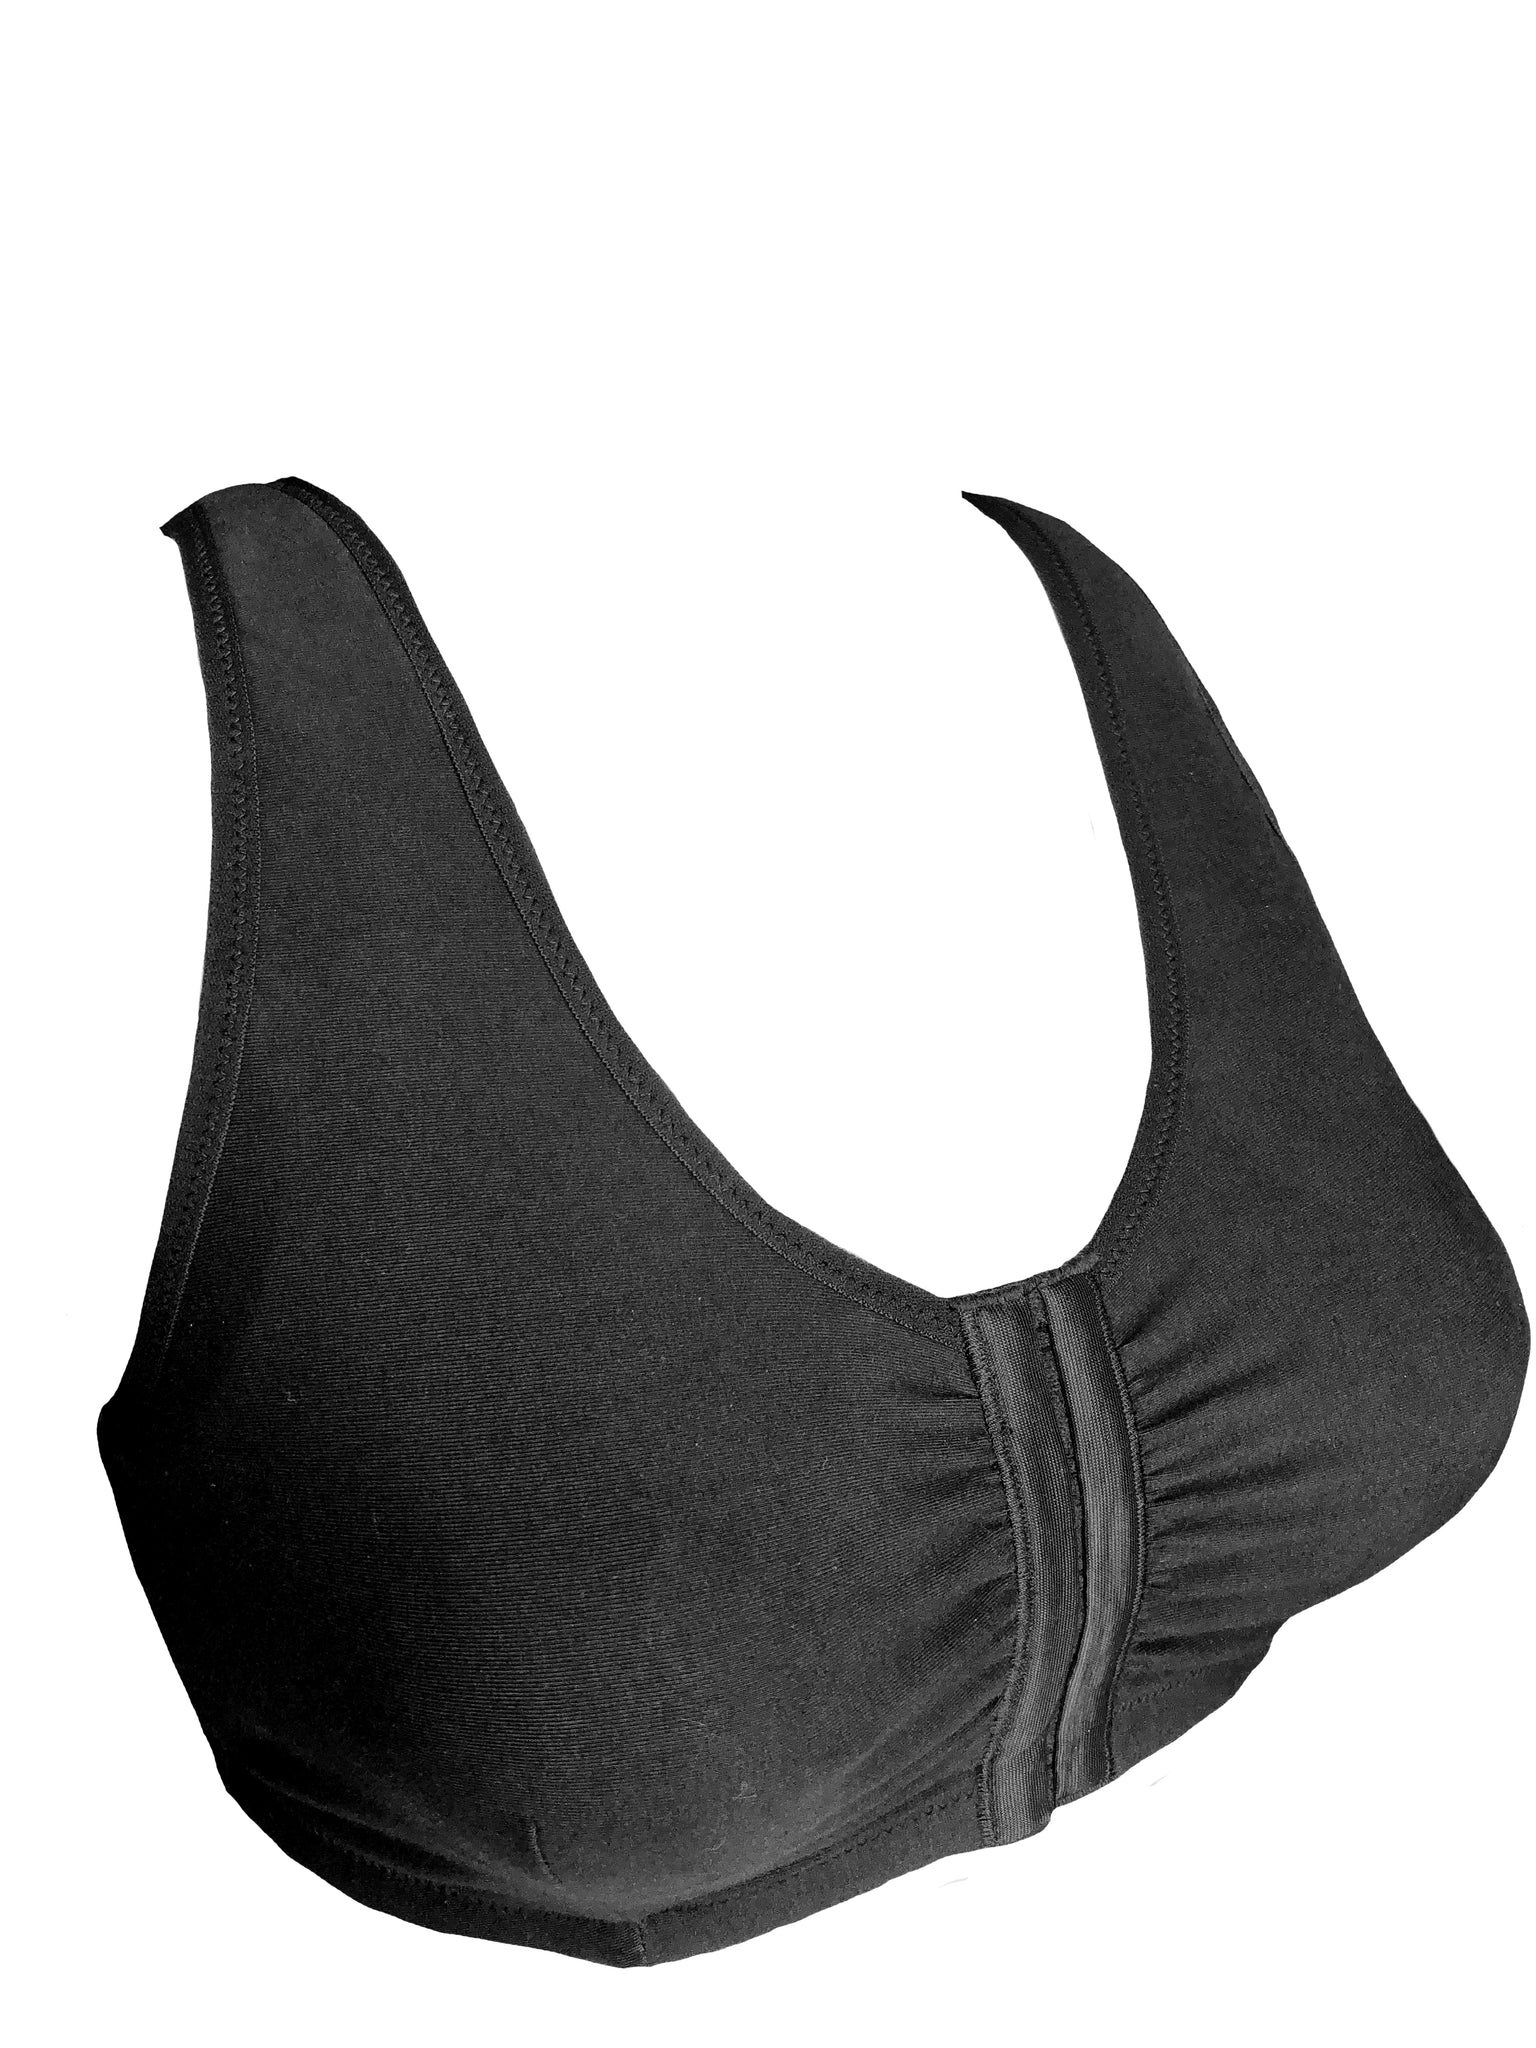 Front Closure Bras Archives